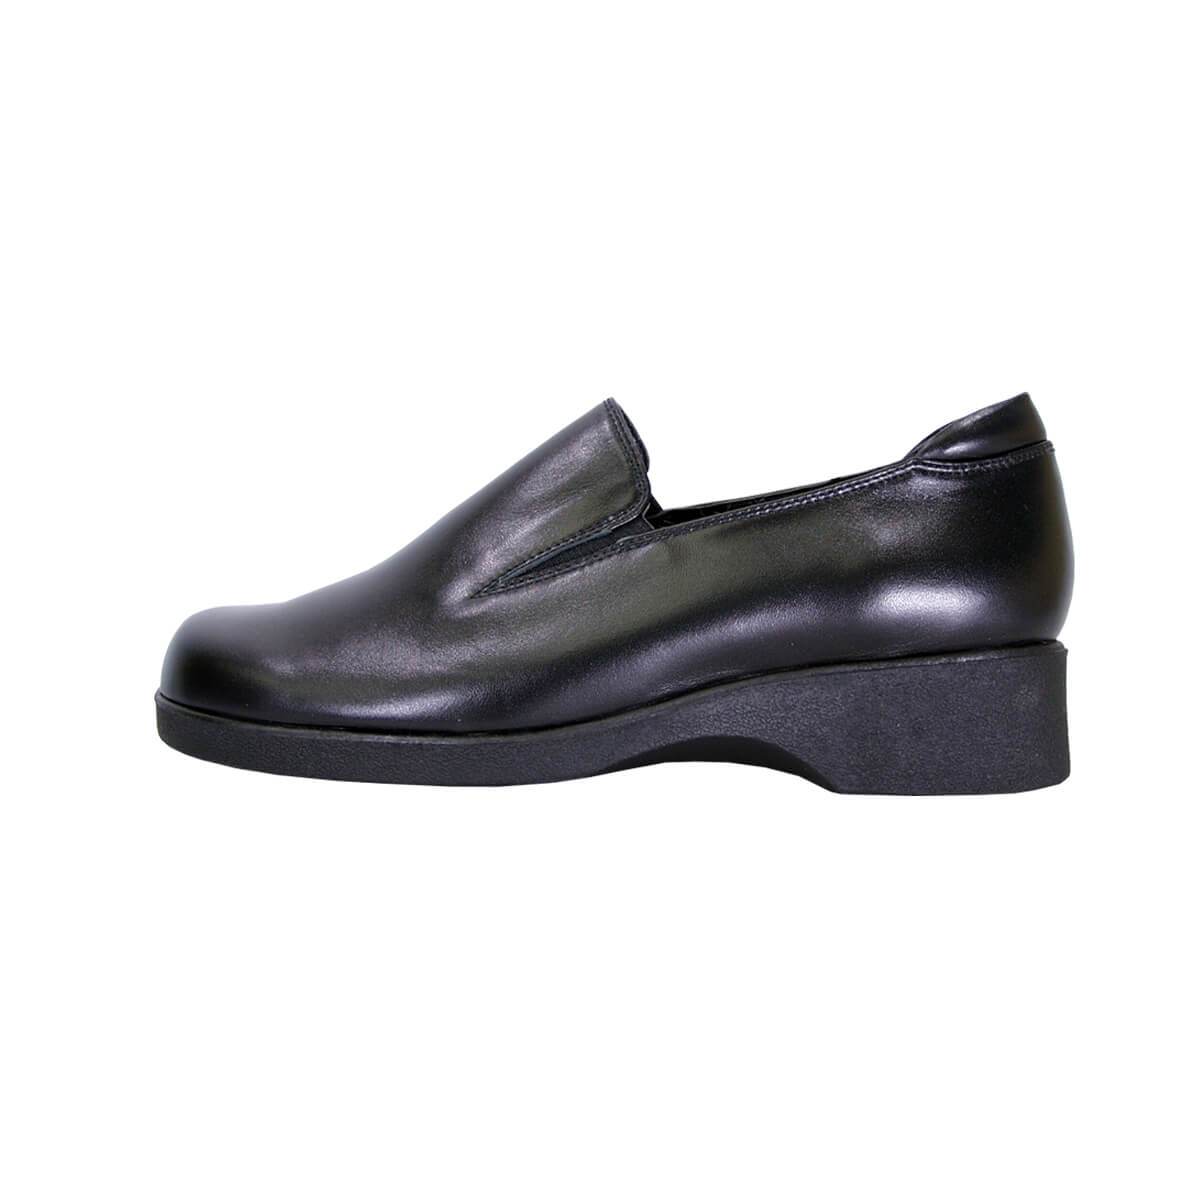 24 HOUR COMFORT Bristol Women's Wide Width Leather Slip-On Shoes